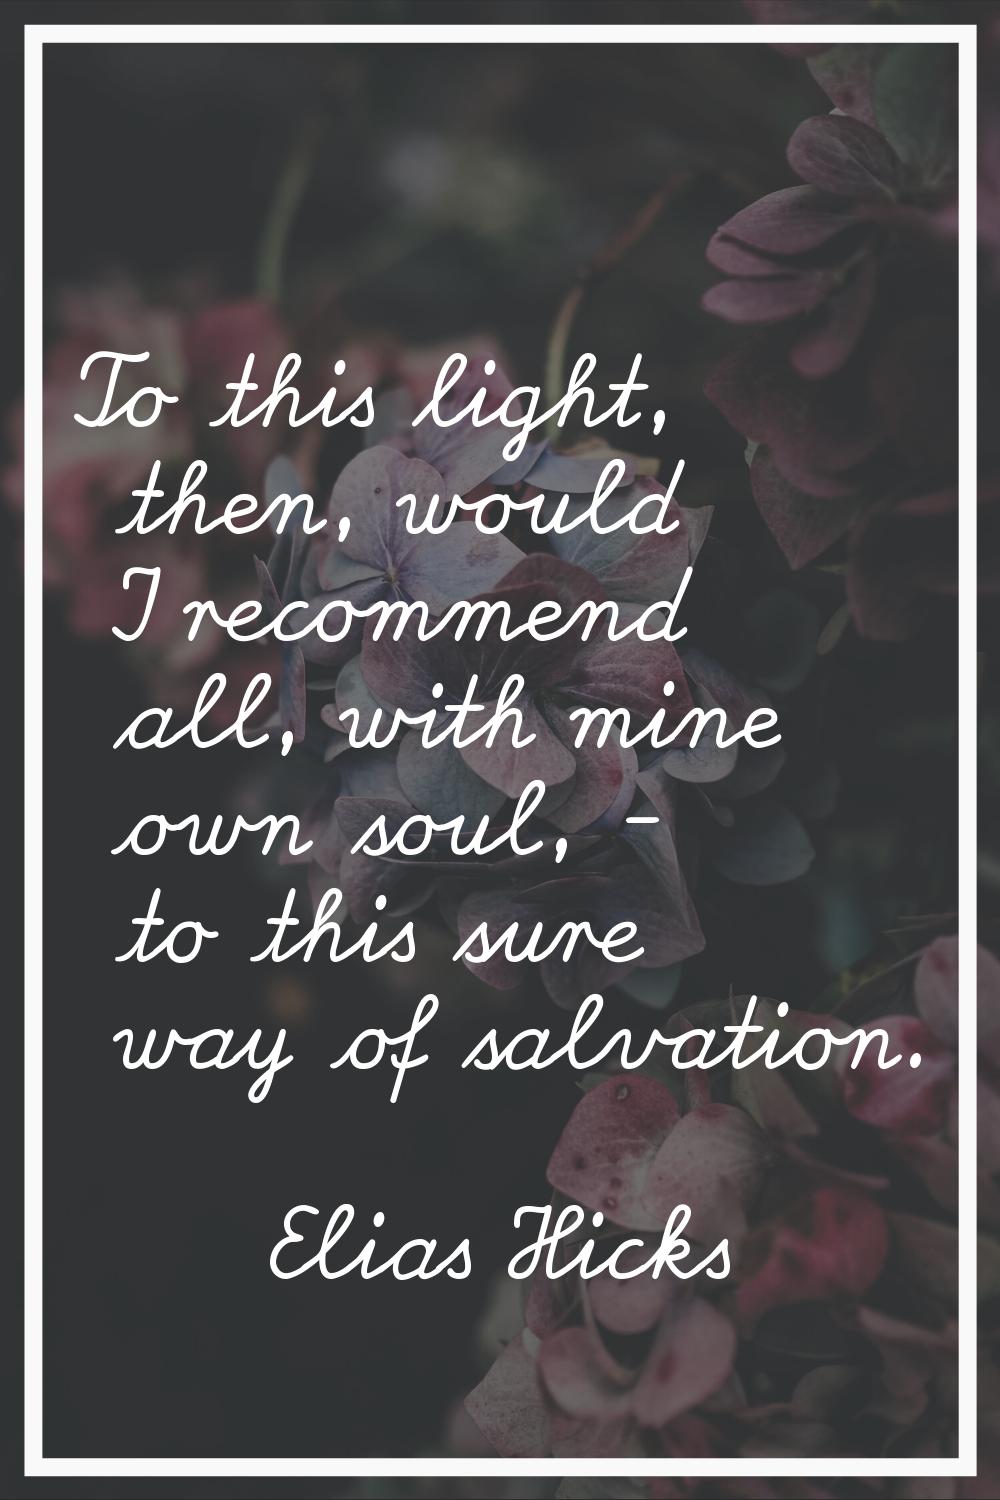 To this light, then, would I recommend all, with mine own soul, - to this sure way of salvation.